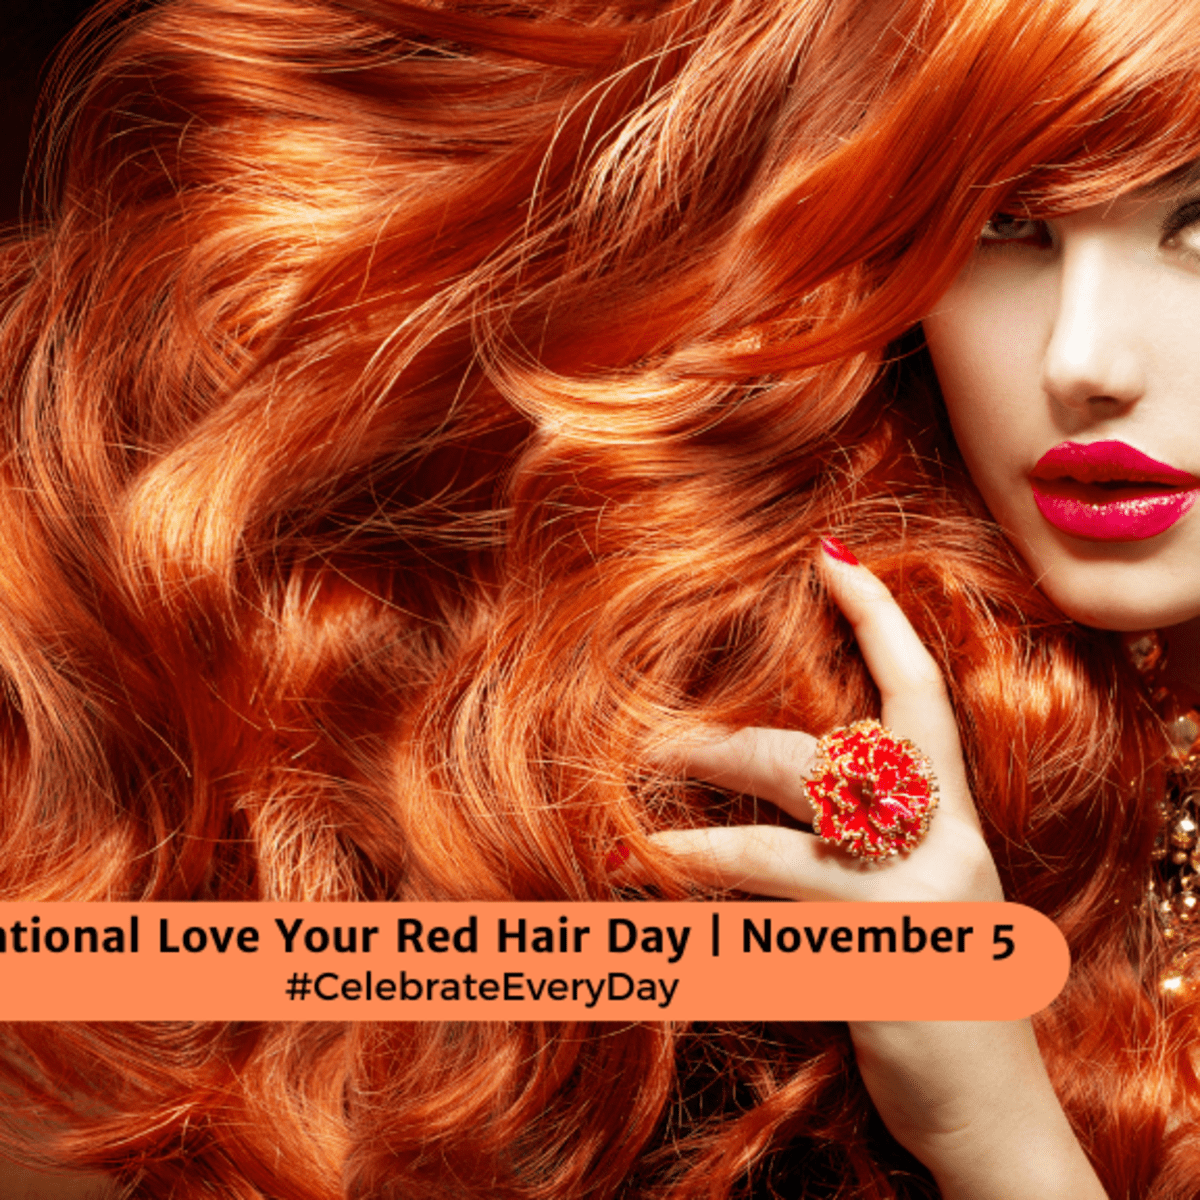 National Love Your Red Hair Day (November 5th)